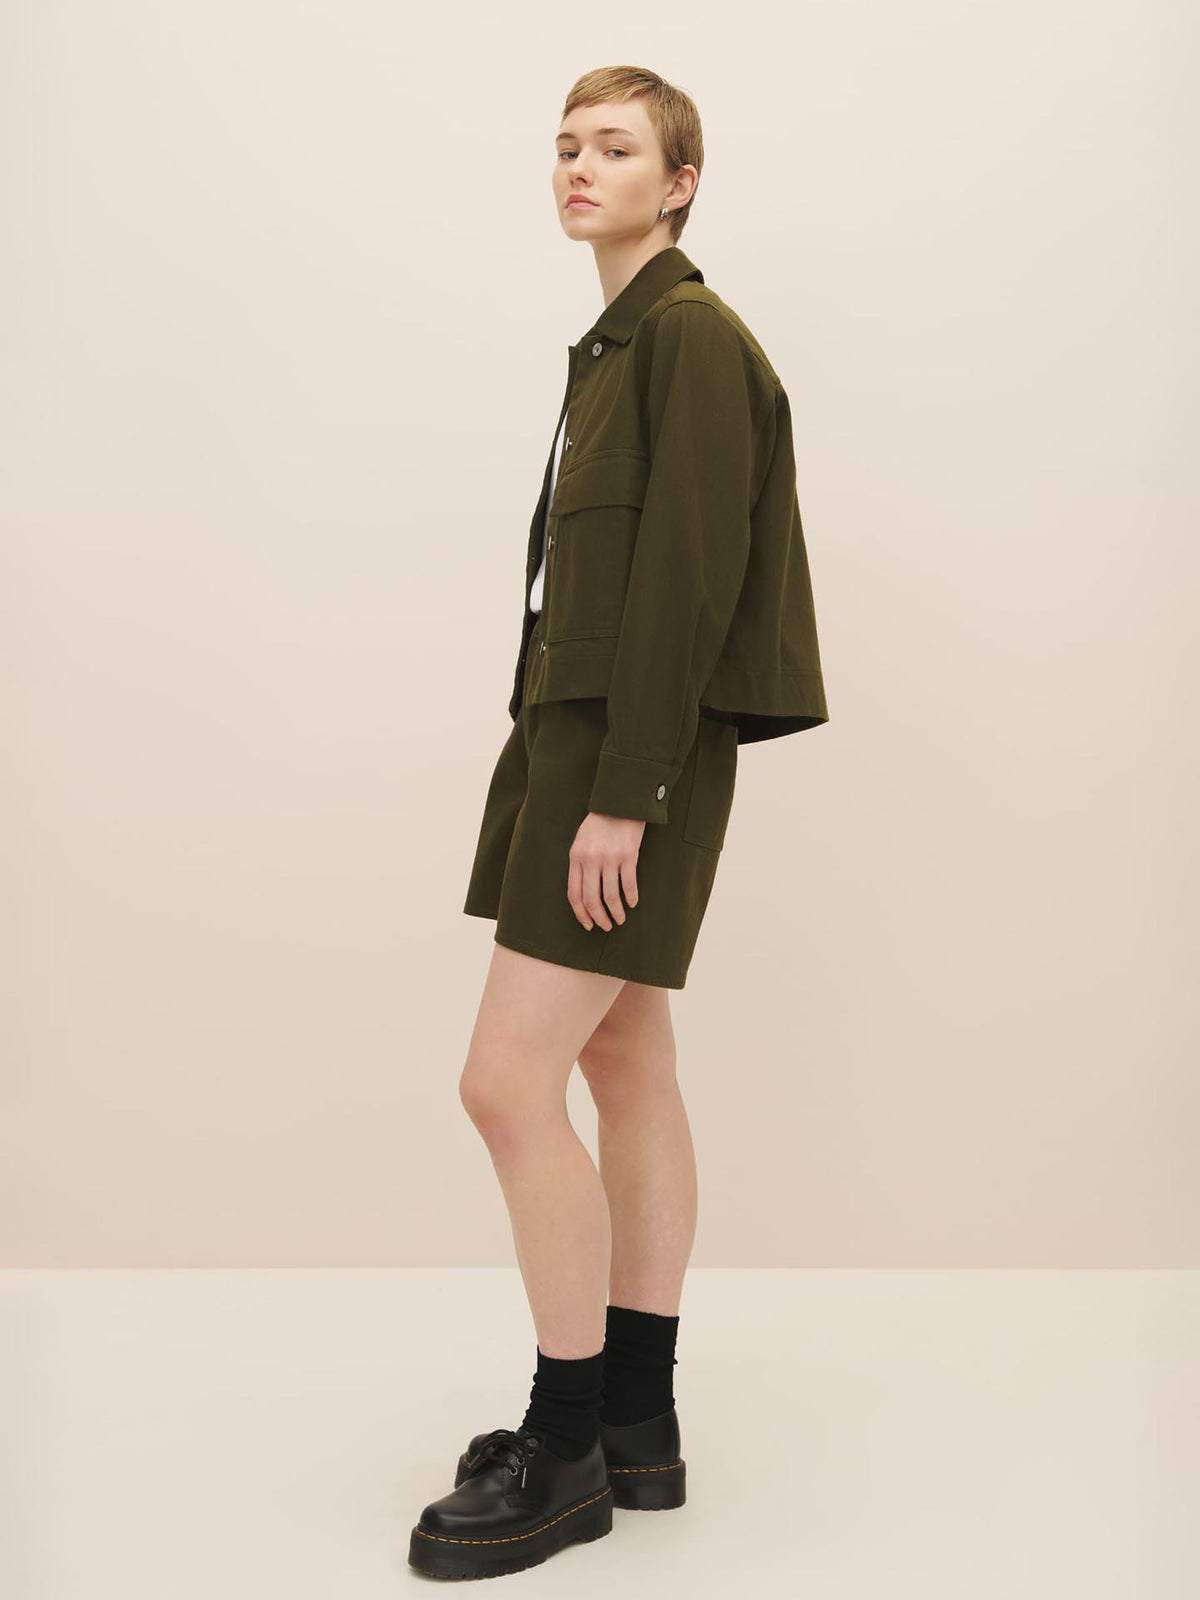 A person standing sideways wearing a Mirror Jacket - Khaki Denim by Kowtow over a white top, matching shorts, black socks, and black platform shoes, all according to the size guide.